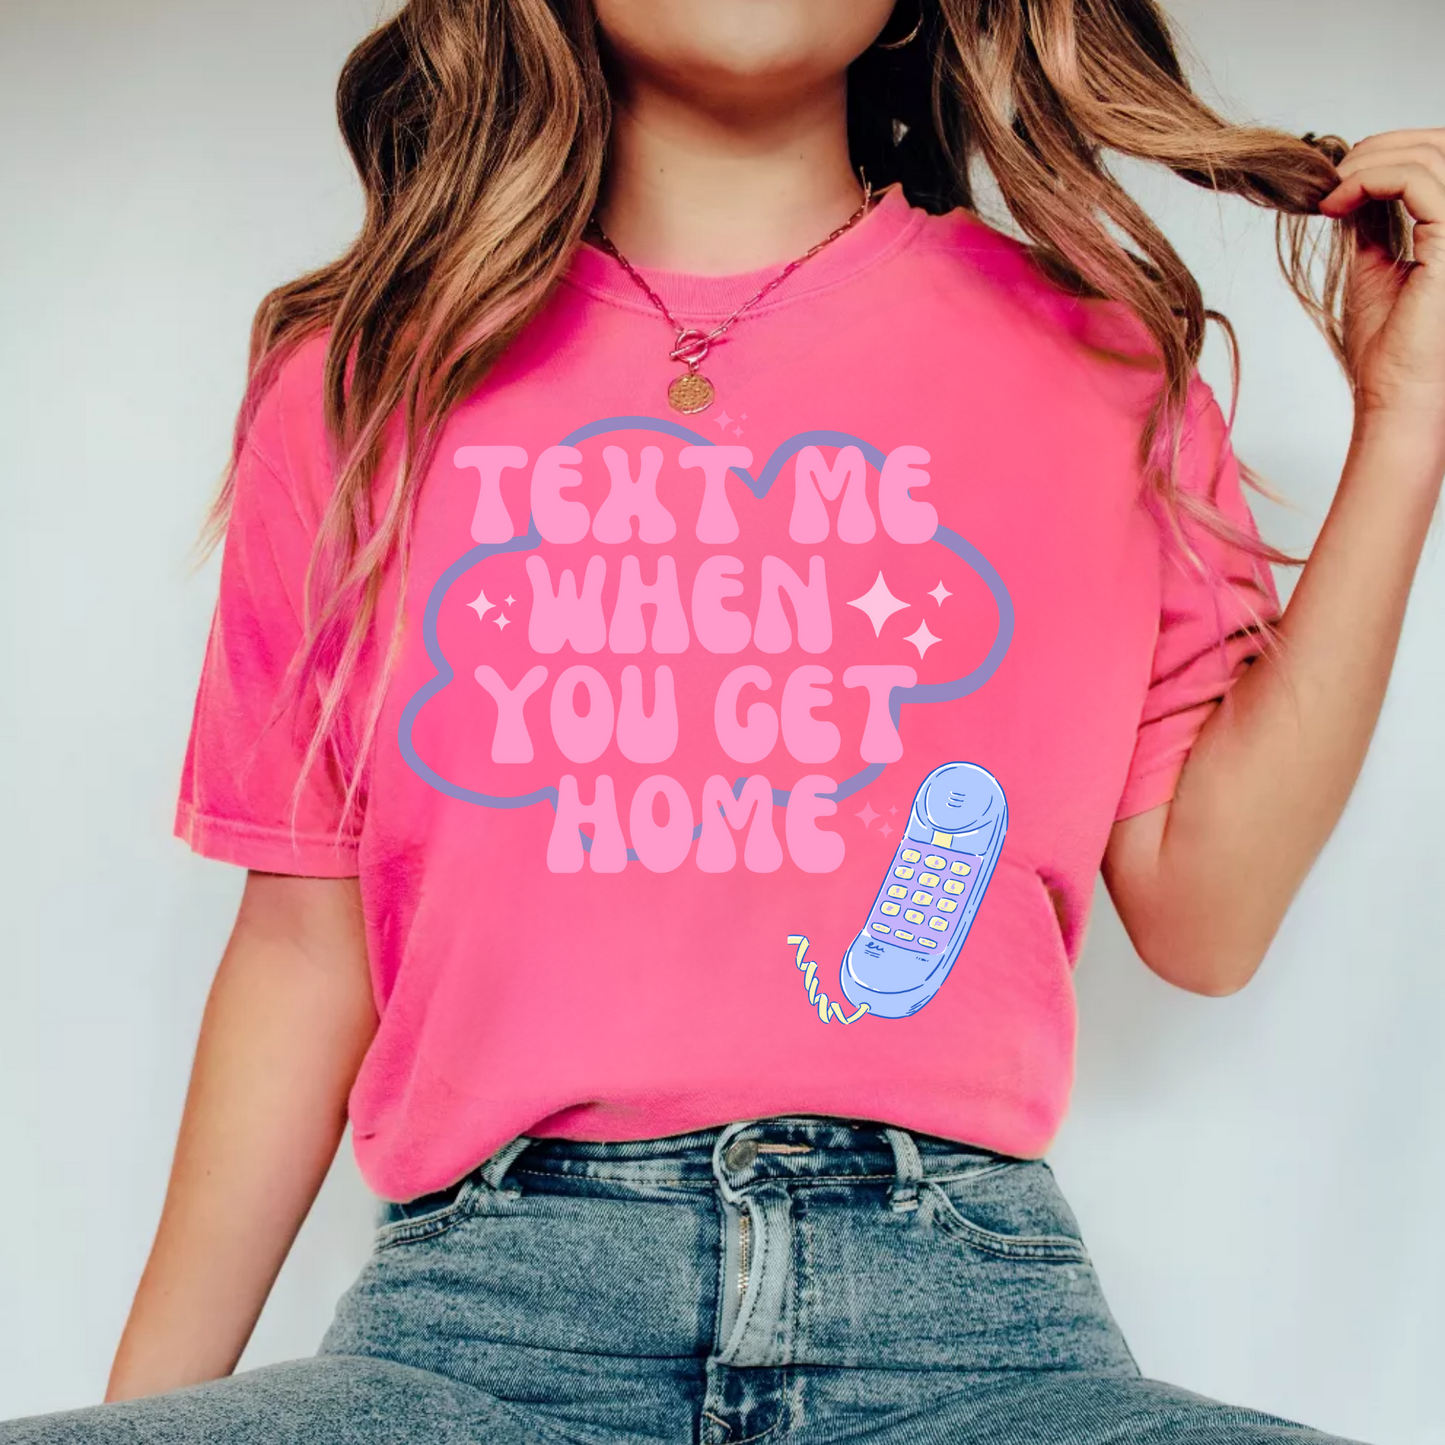 (shirt not included)Text me when you get Home  - Matte Clear Film Transfer